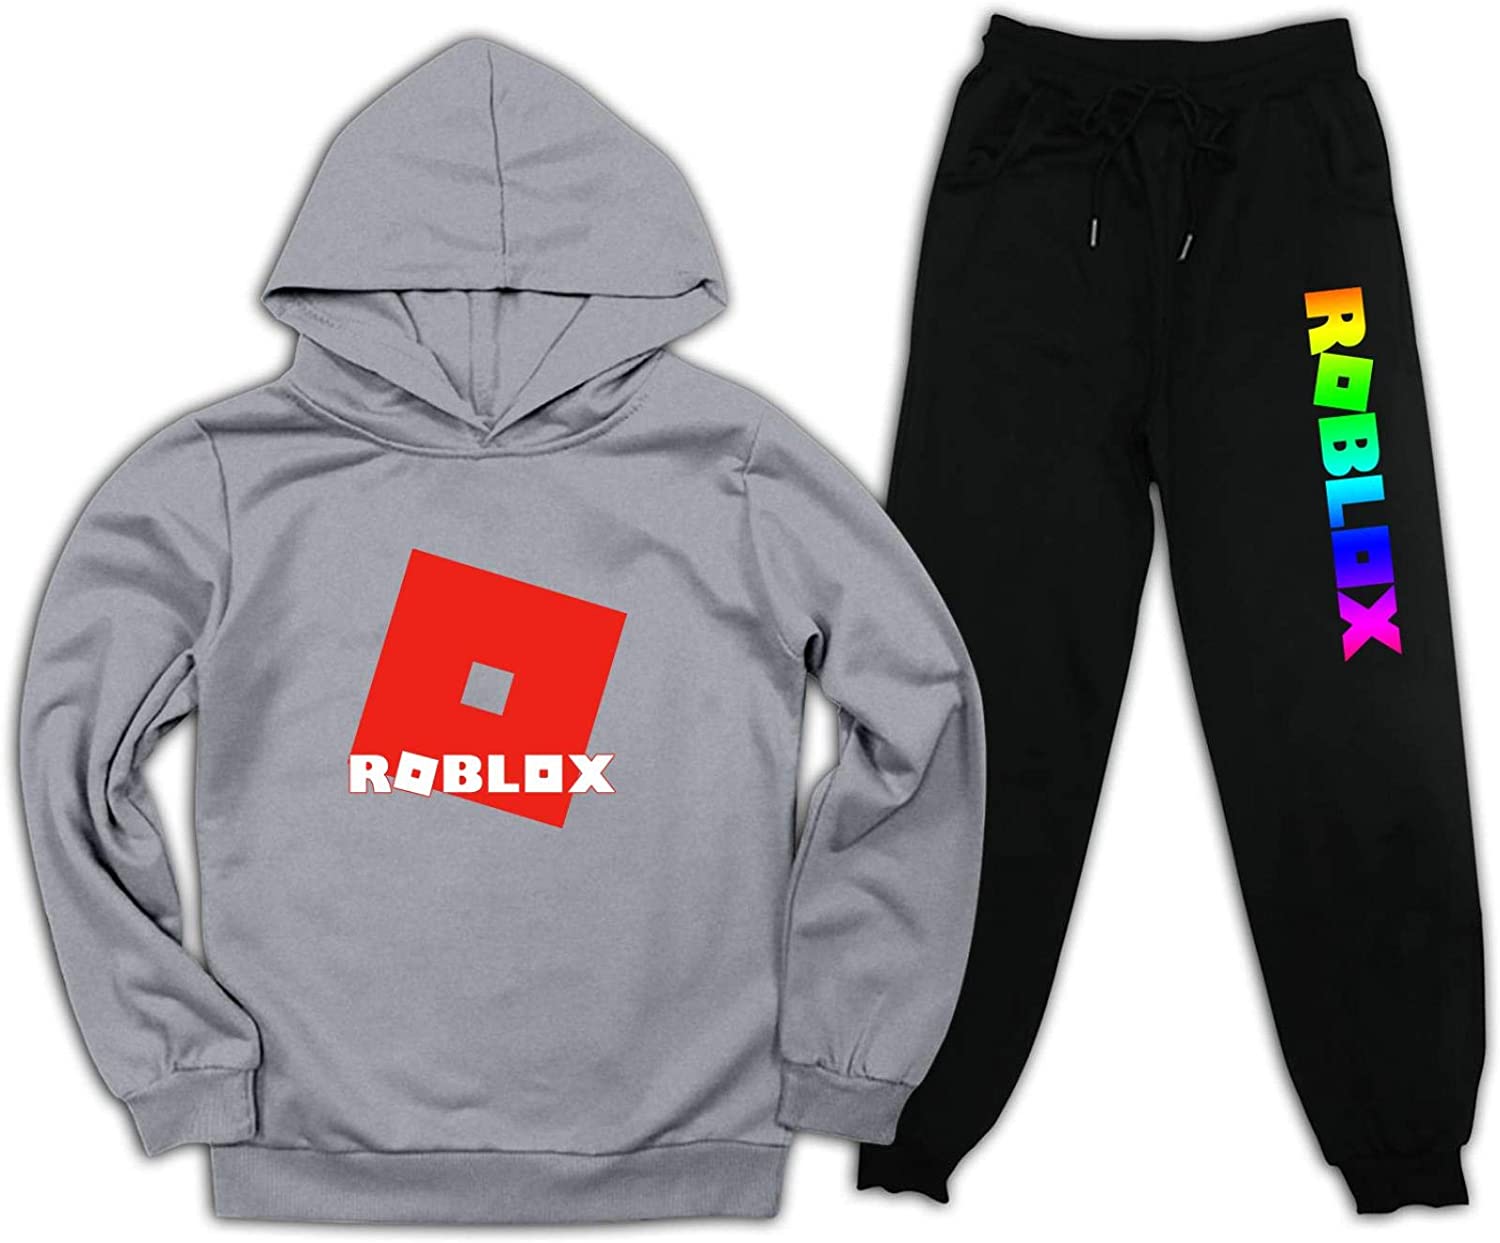 Mosdelu Roblox Hoodie And Sweatpants Suit For Boys Girls - roblox grey suit